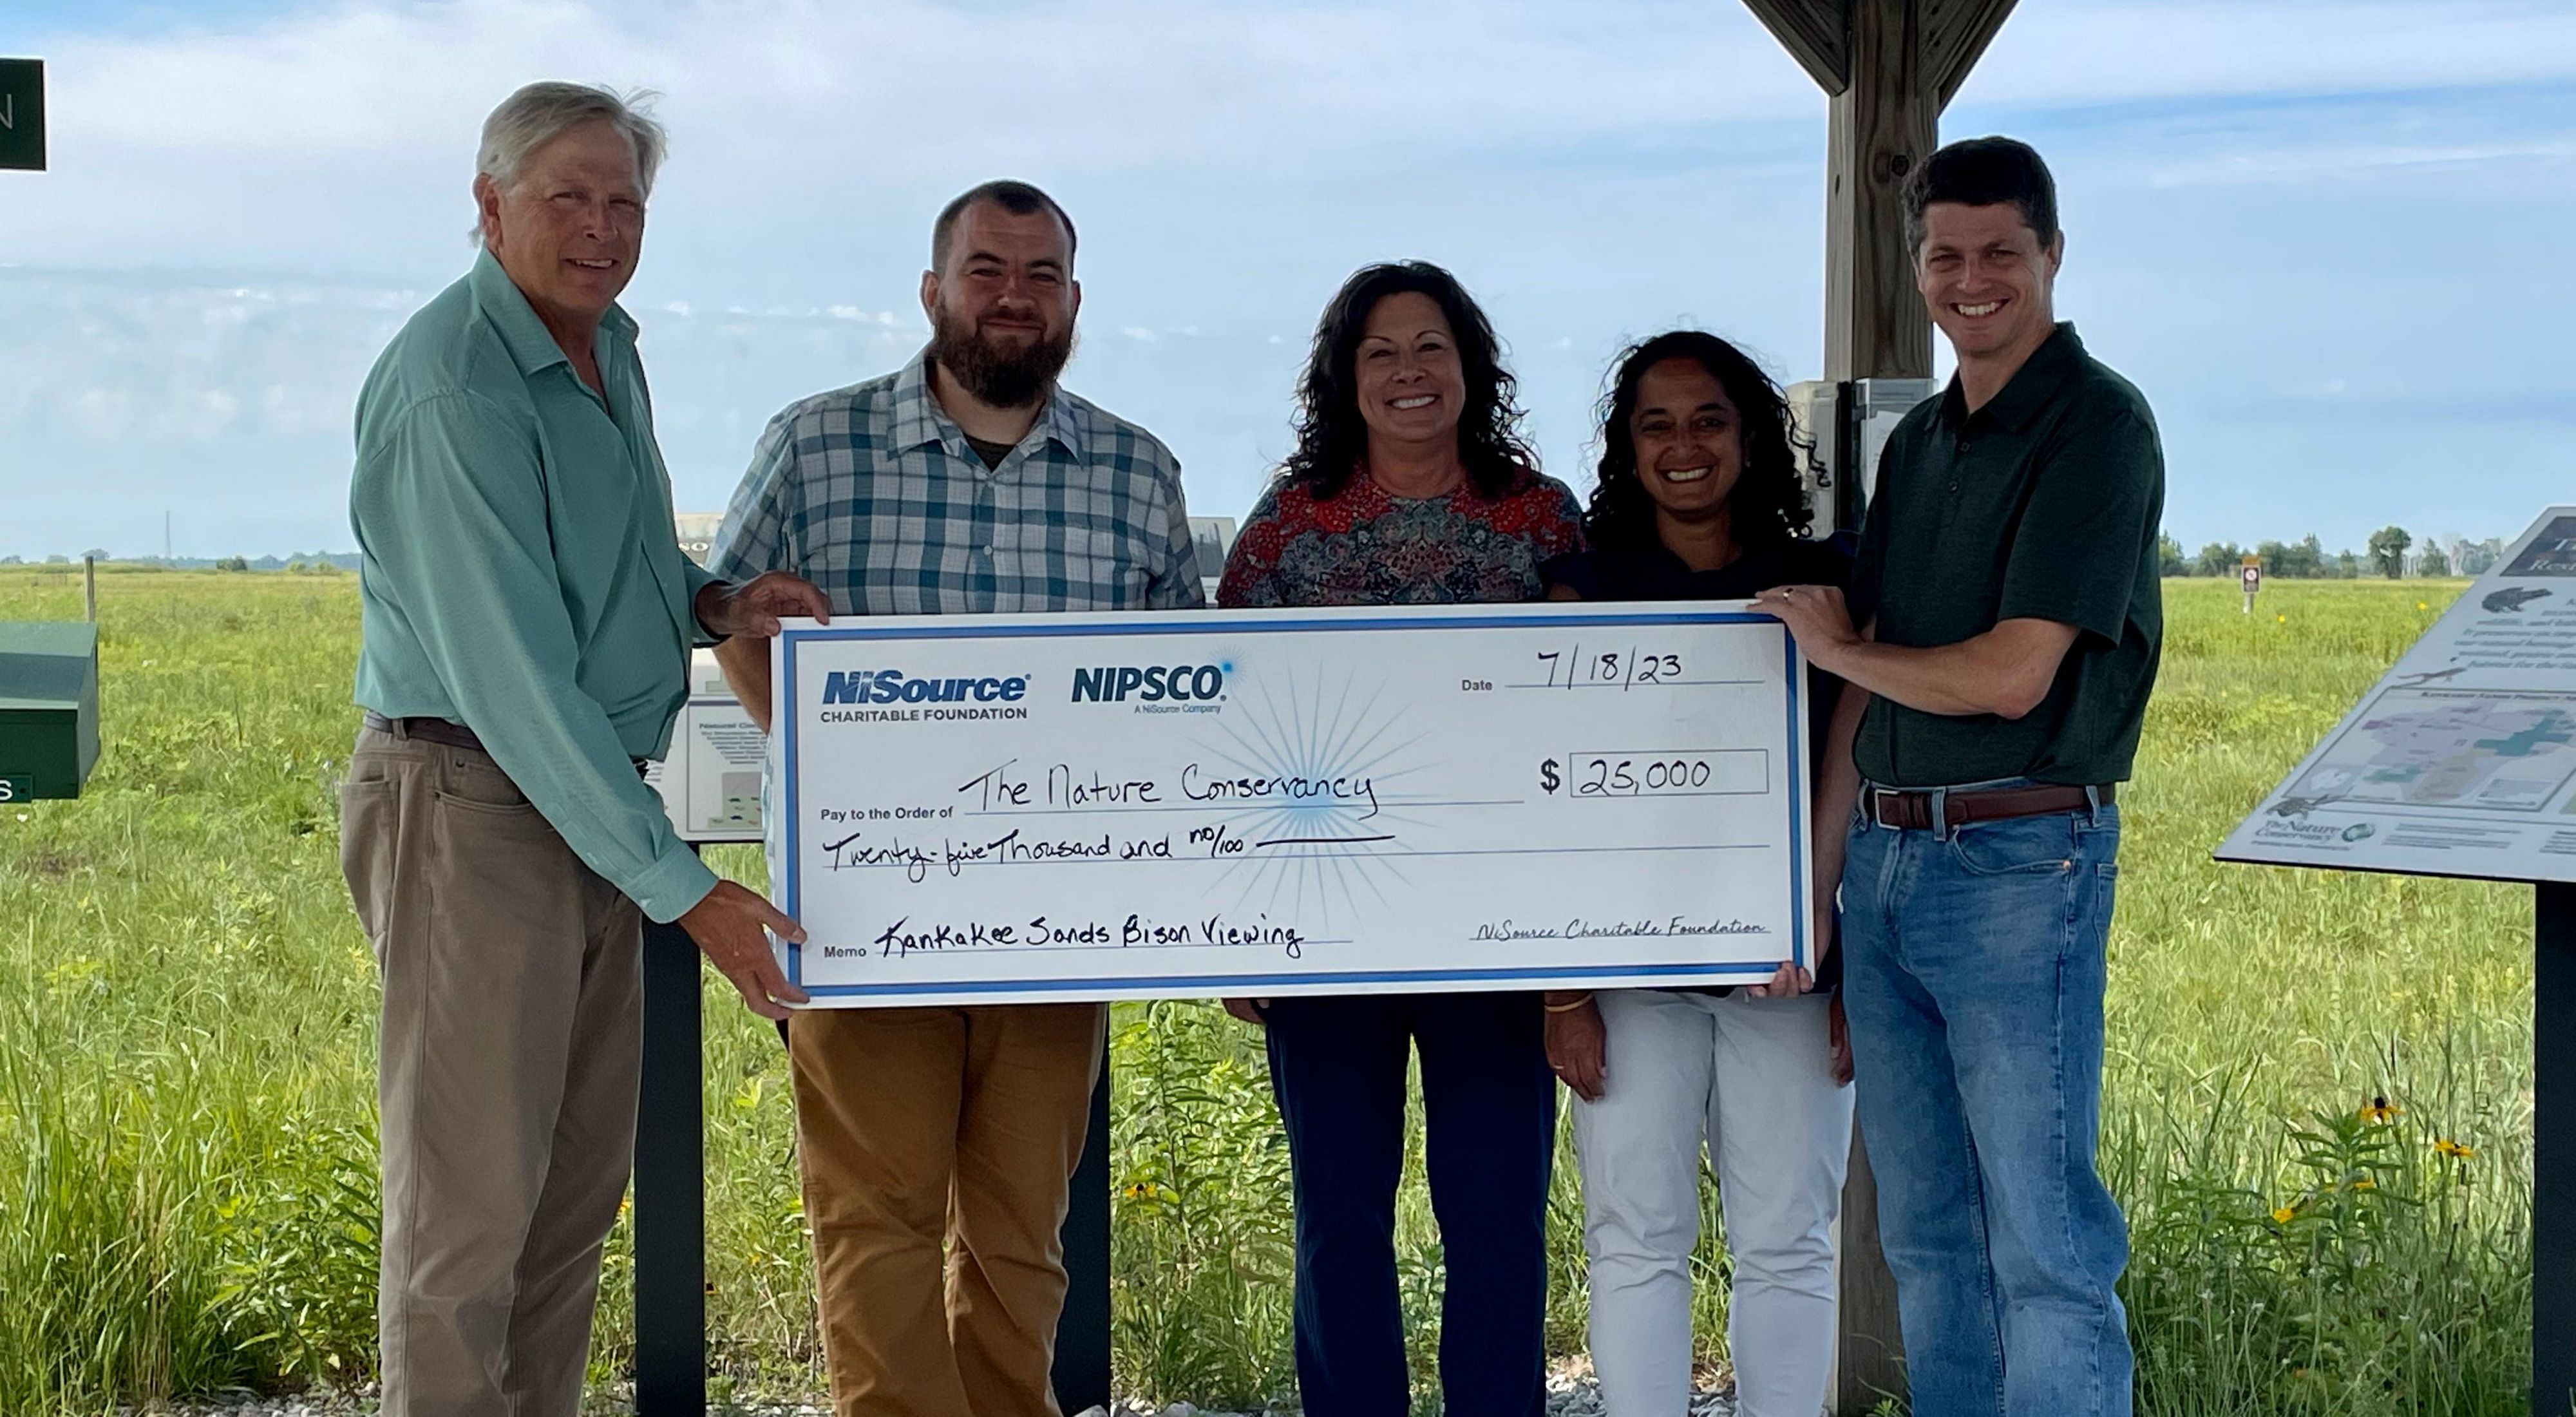 Staff from The Nature Conservancy and NiSource/NIPSCO stand under a wooden structure at Kankakee Sands and hold an oversized check made out for $25,000.